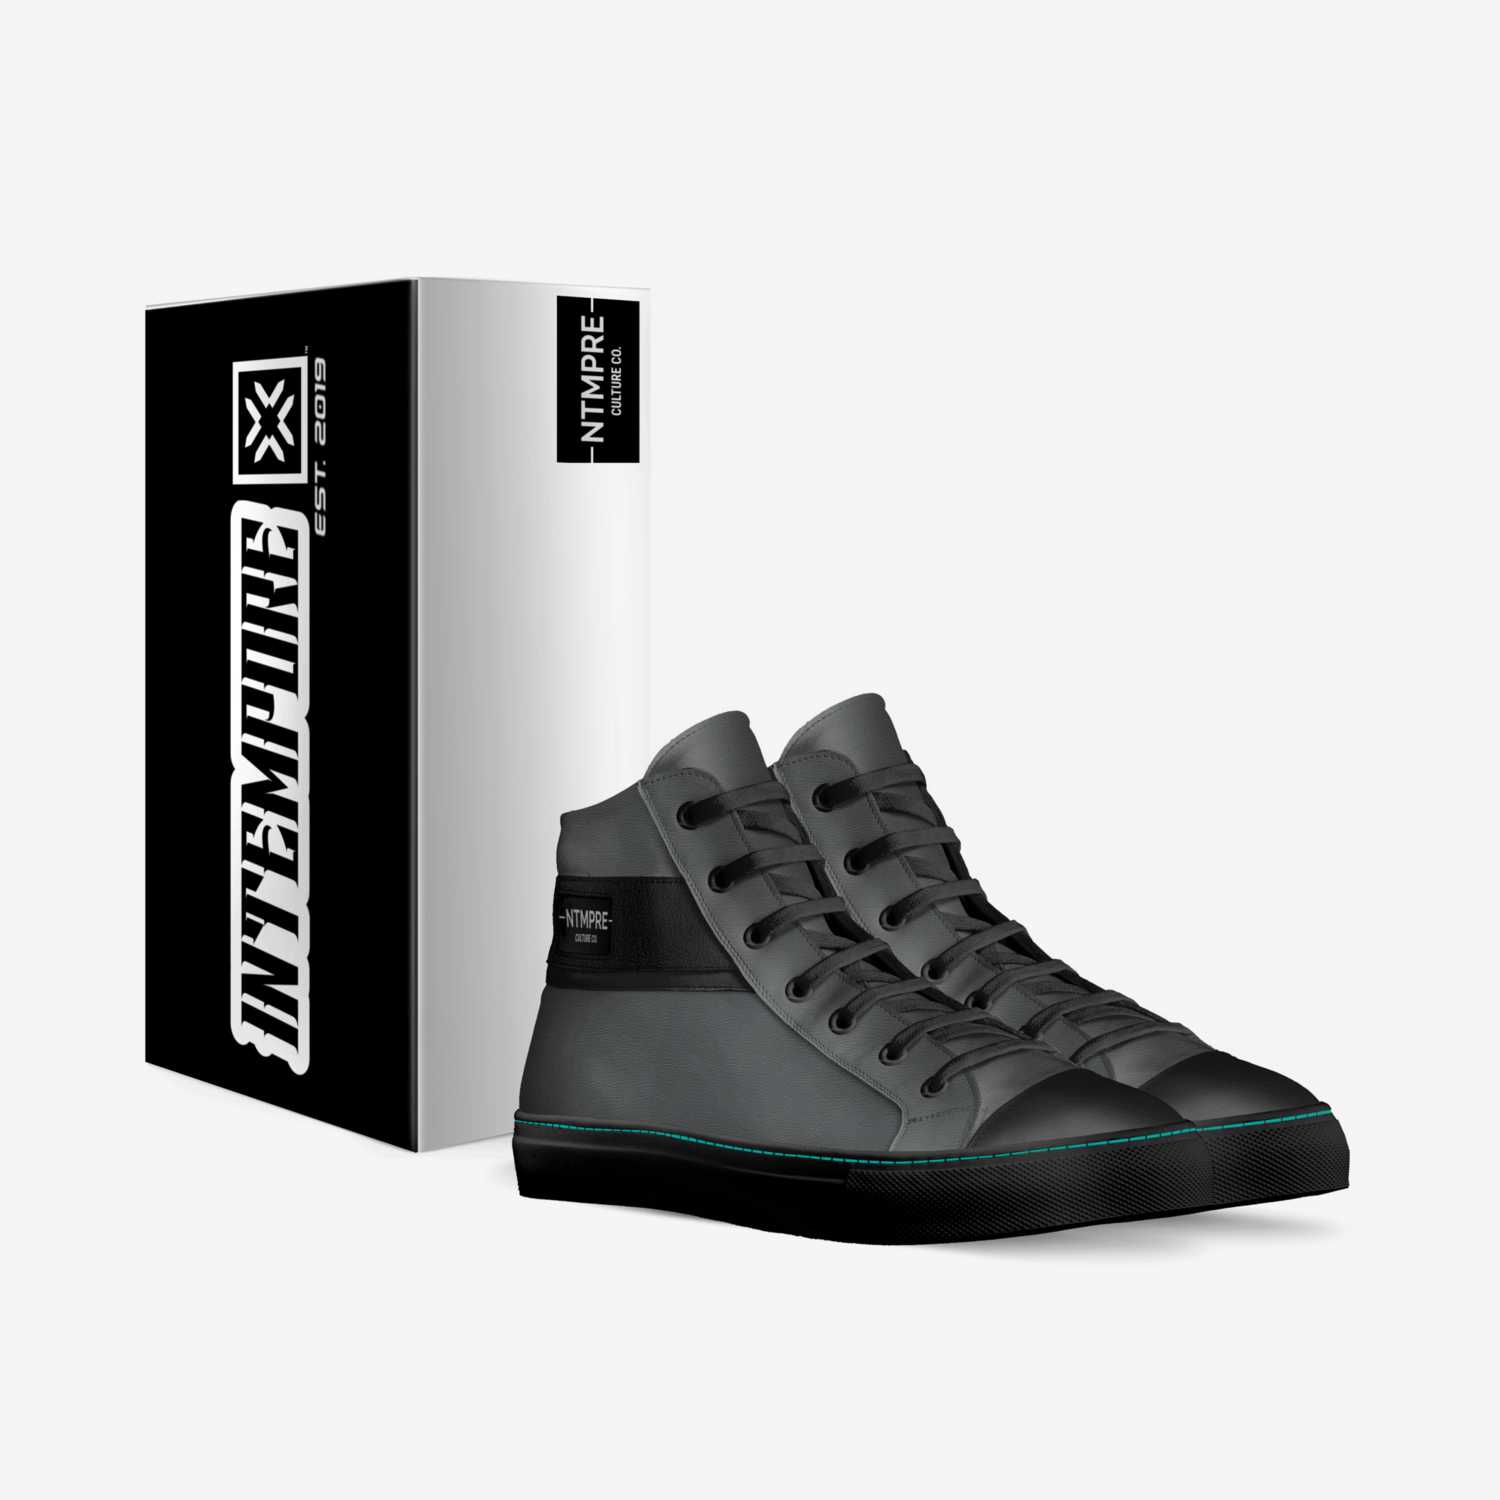 Foundation V1 custom made in Italy shoes by In Tempore Culture Co | Box view